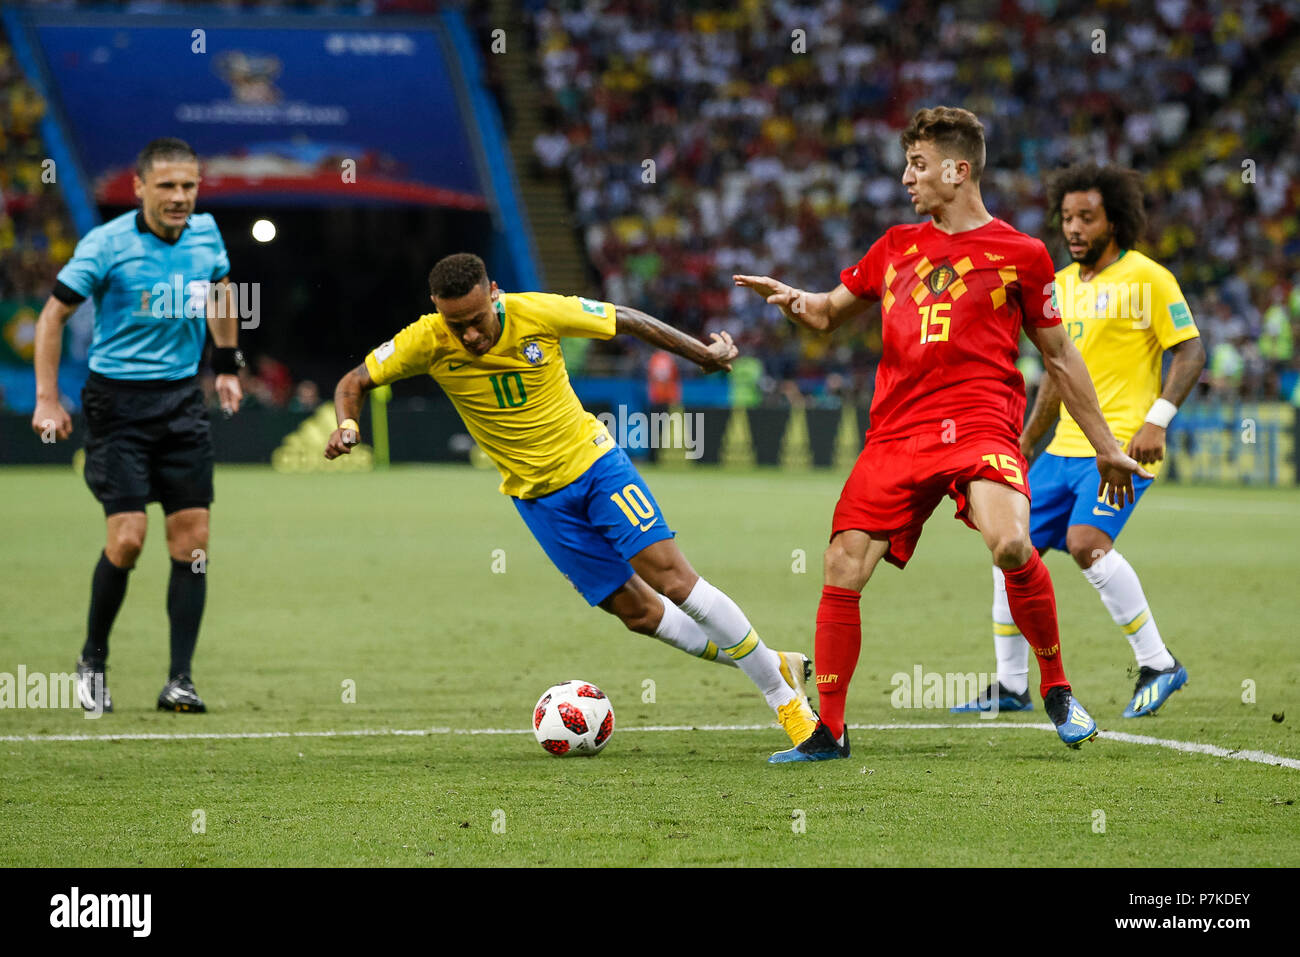 Neymar of Brazil is tackled by Thomas Meunier of Belgium during the 2018 FIFA World Cup Quarter Final match between Brazil and Belgium at Kazan Arena on July 6th 2018 in Kazan, Russia. (Photo by Daniel Chesterton/phcimages.com) Stock Photo